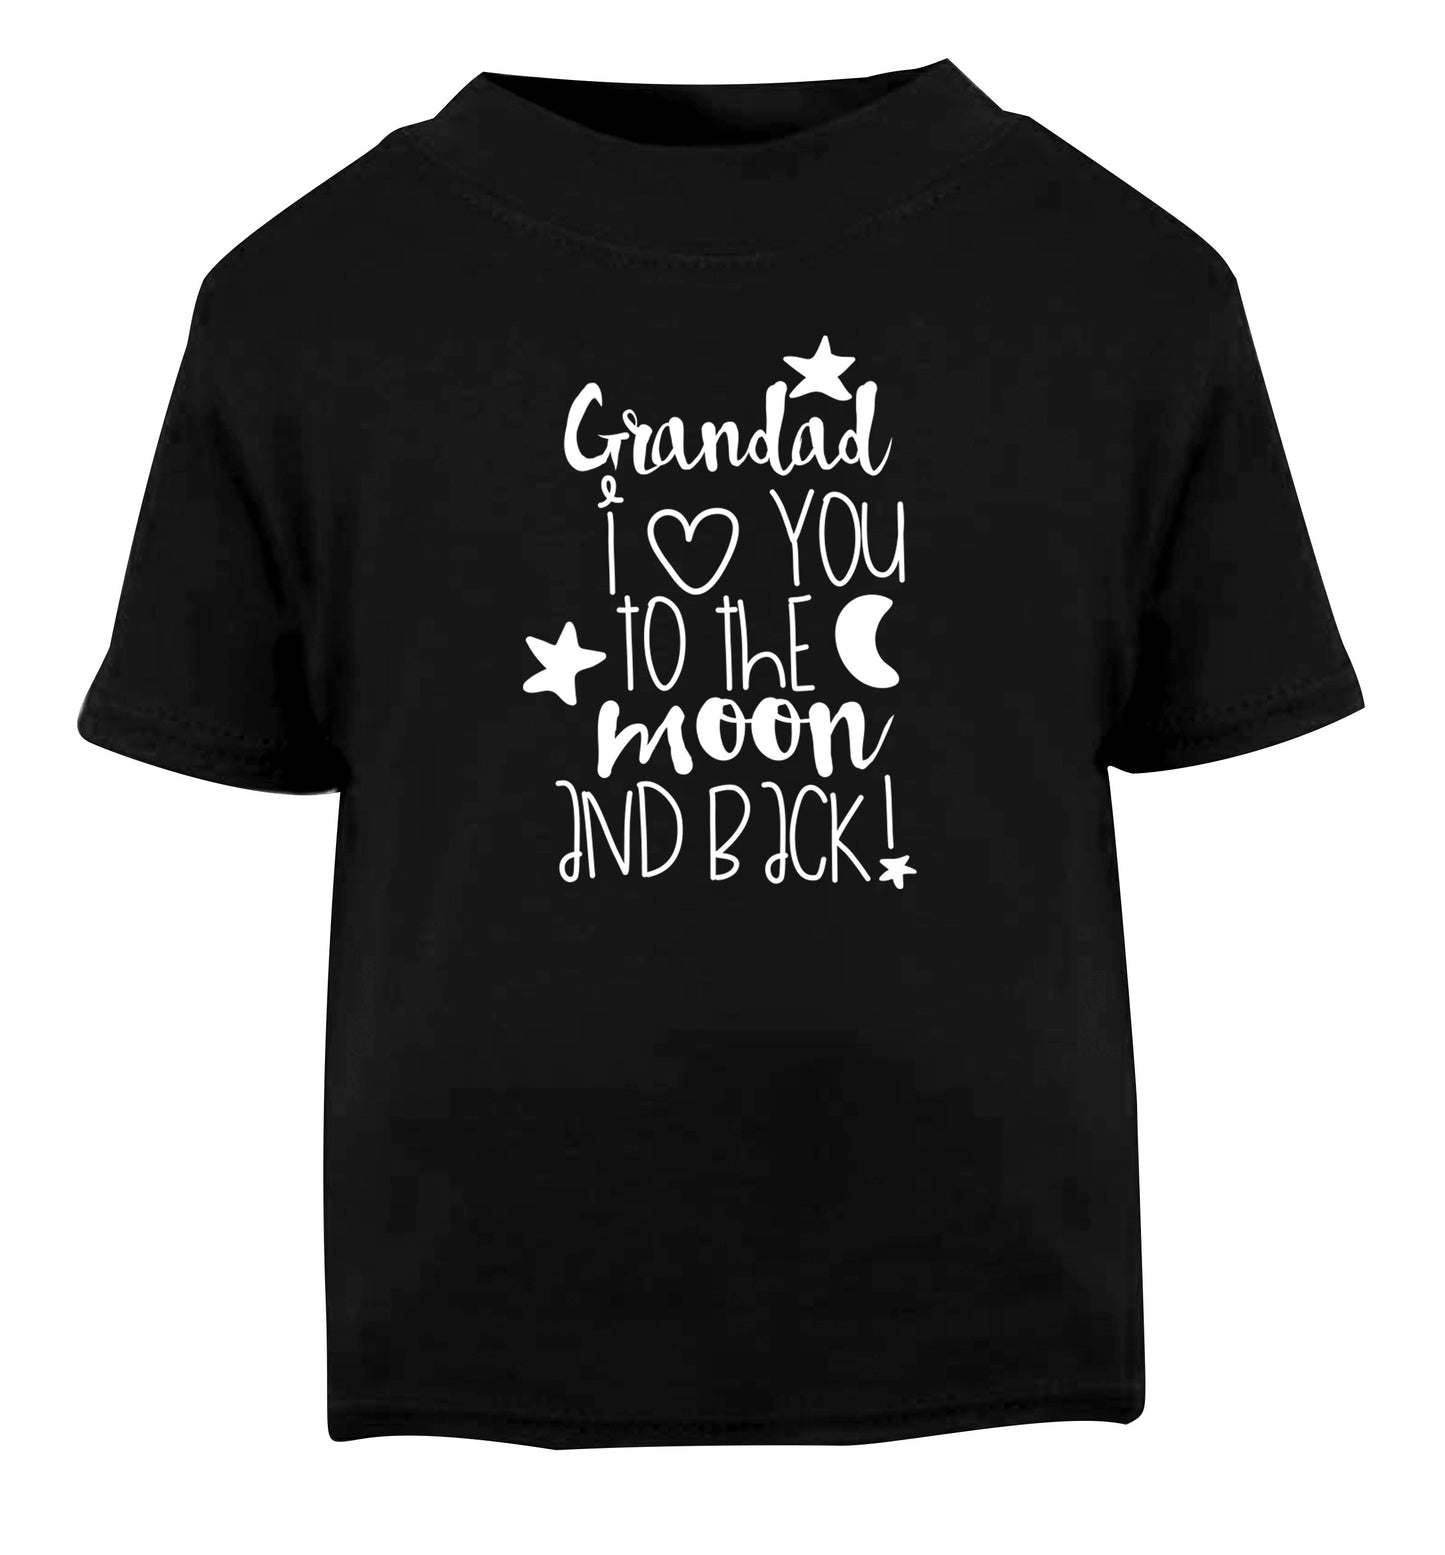 Grandad's I love you to the moon and back Black Baby Toddler Tshirt 2 years